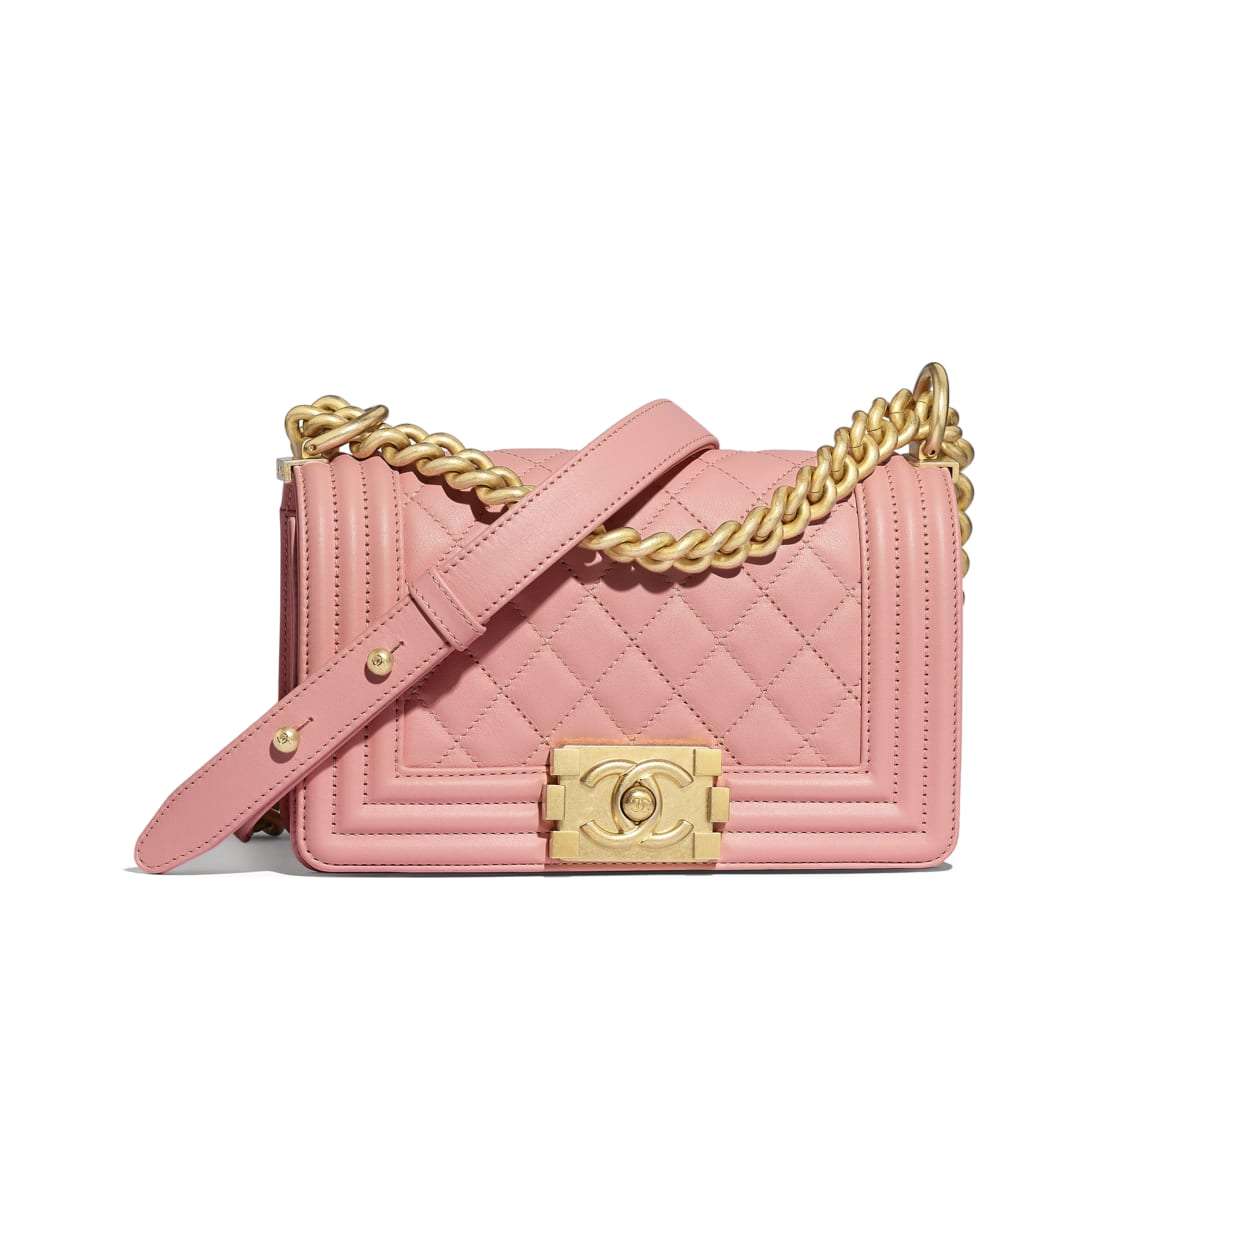 Chanel's New Bag Trend For 2019 Is Here — And It's Extra